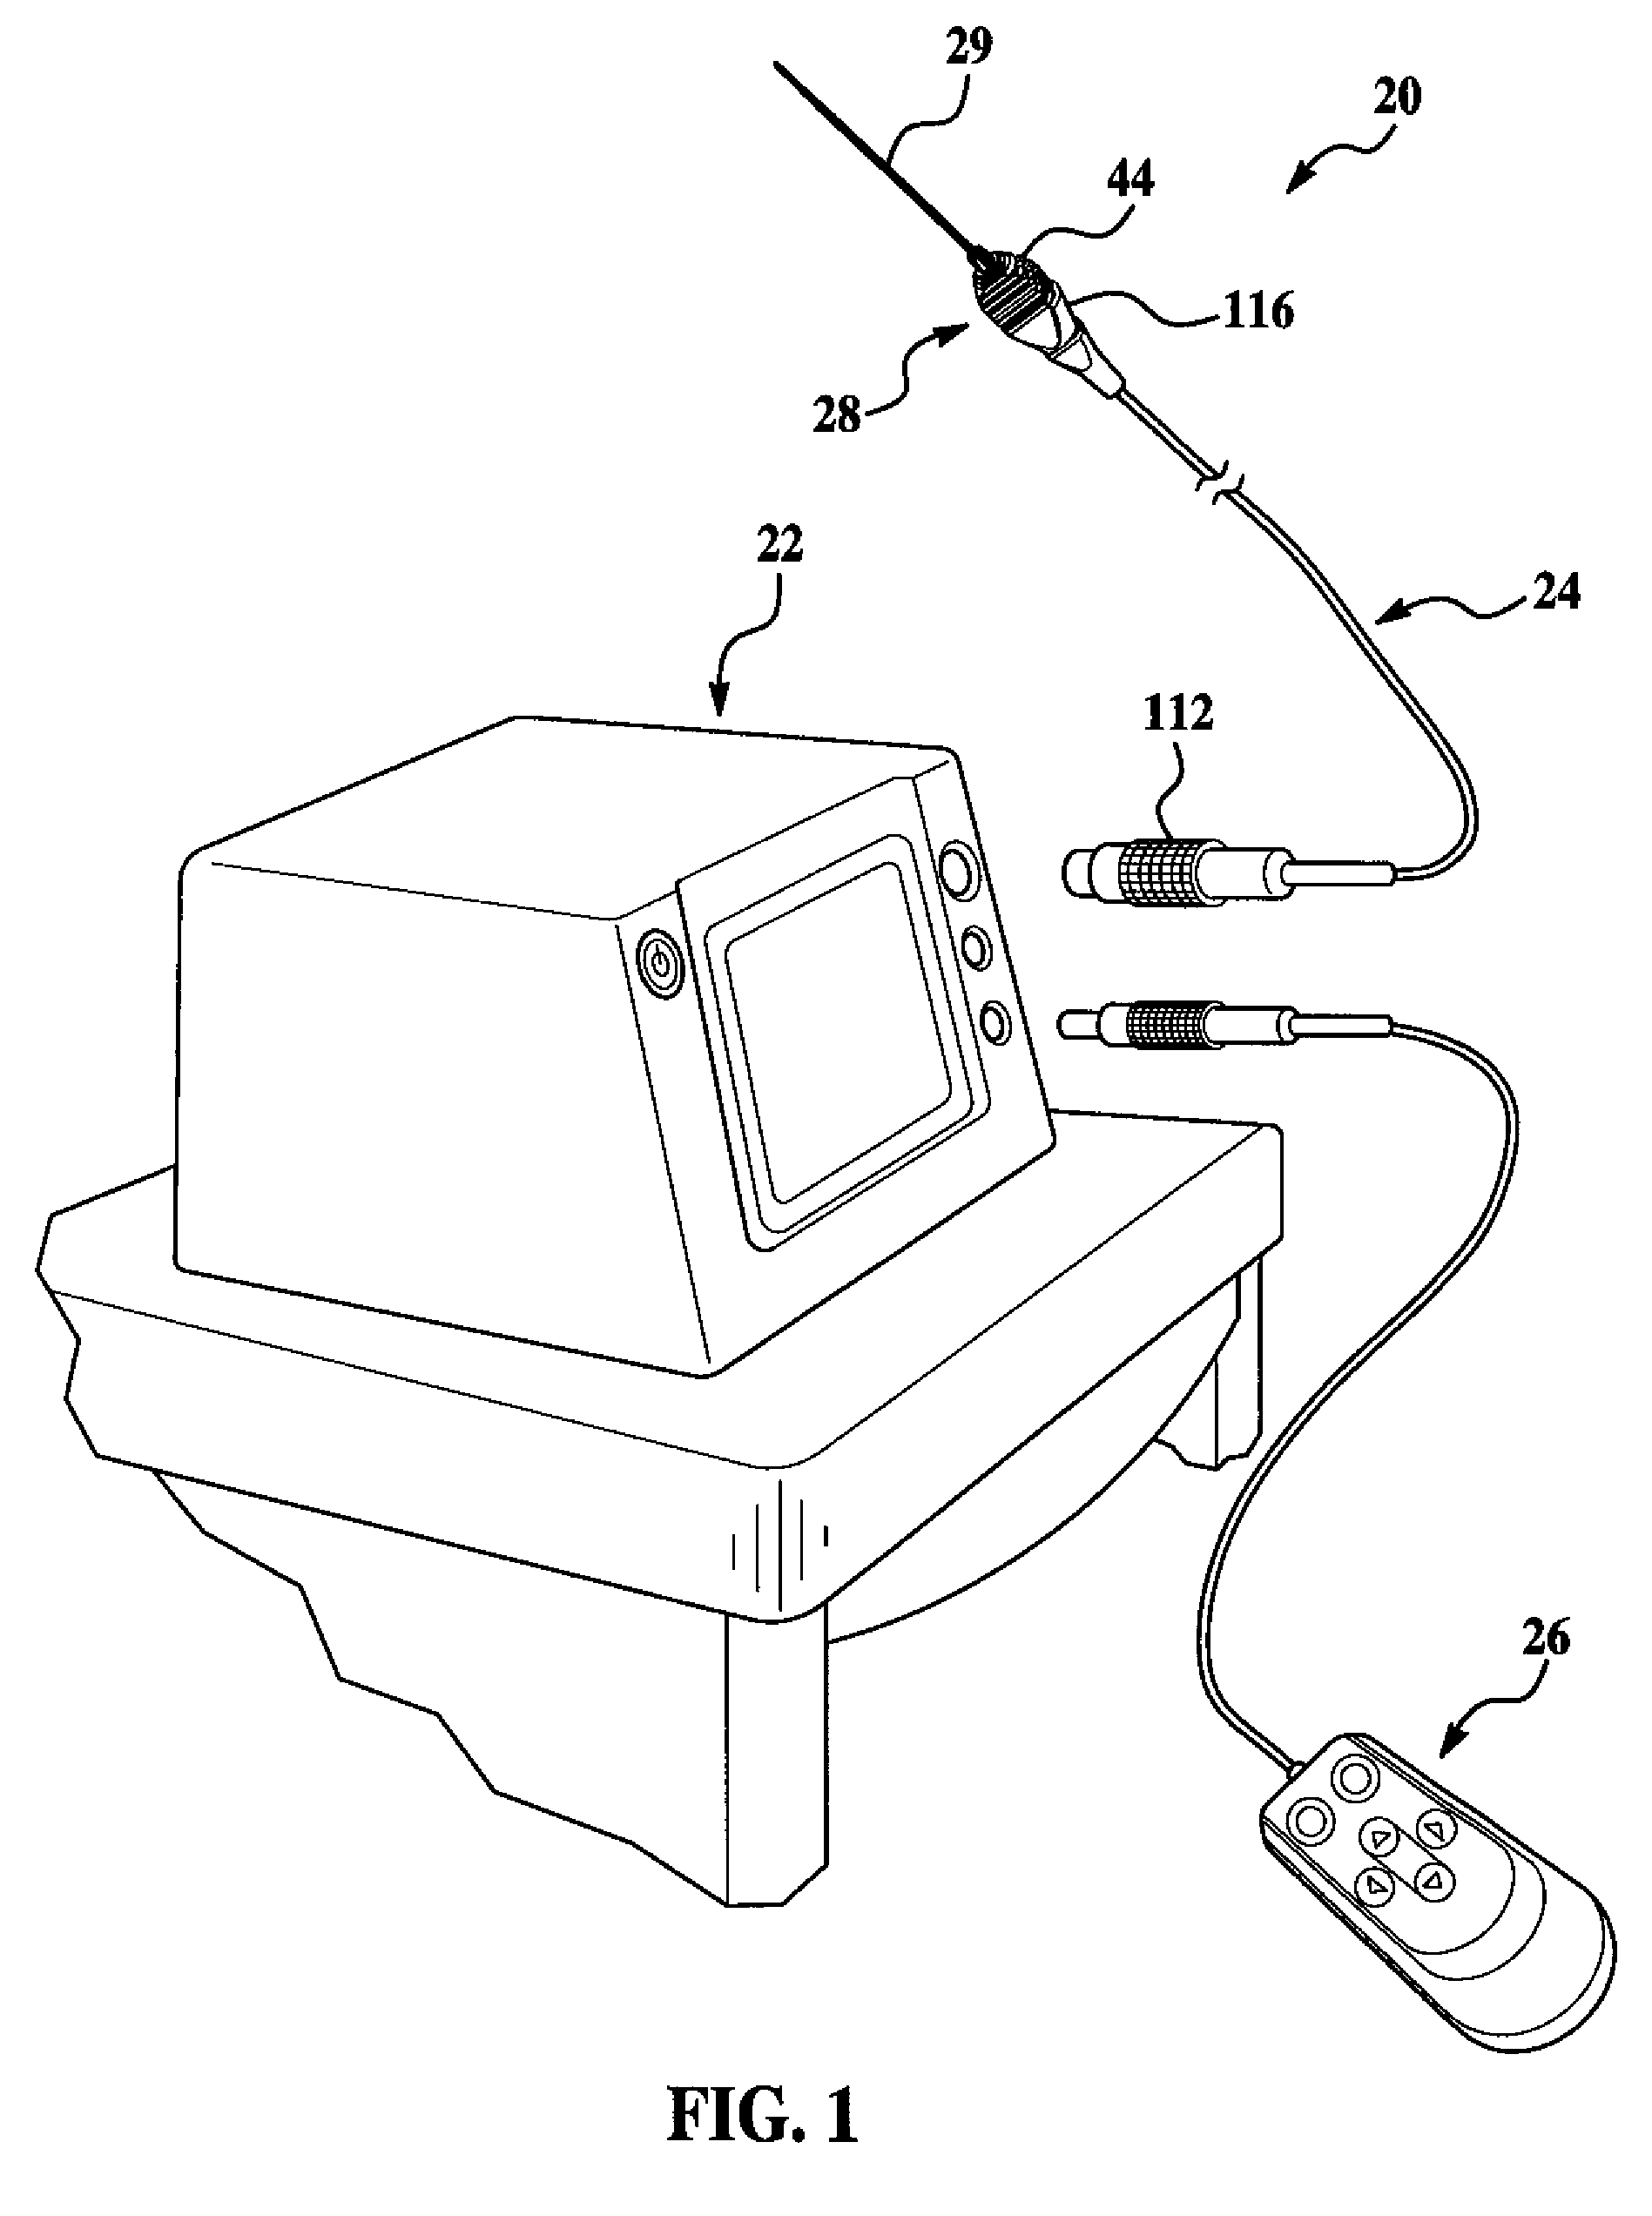 Bipolar cannula for use with an electrode assembly having a separate supply electrode